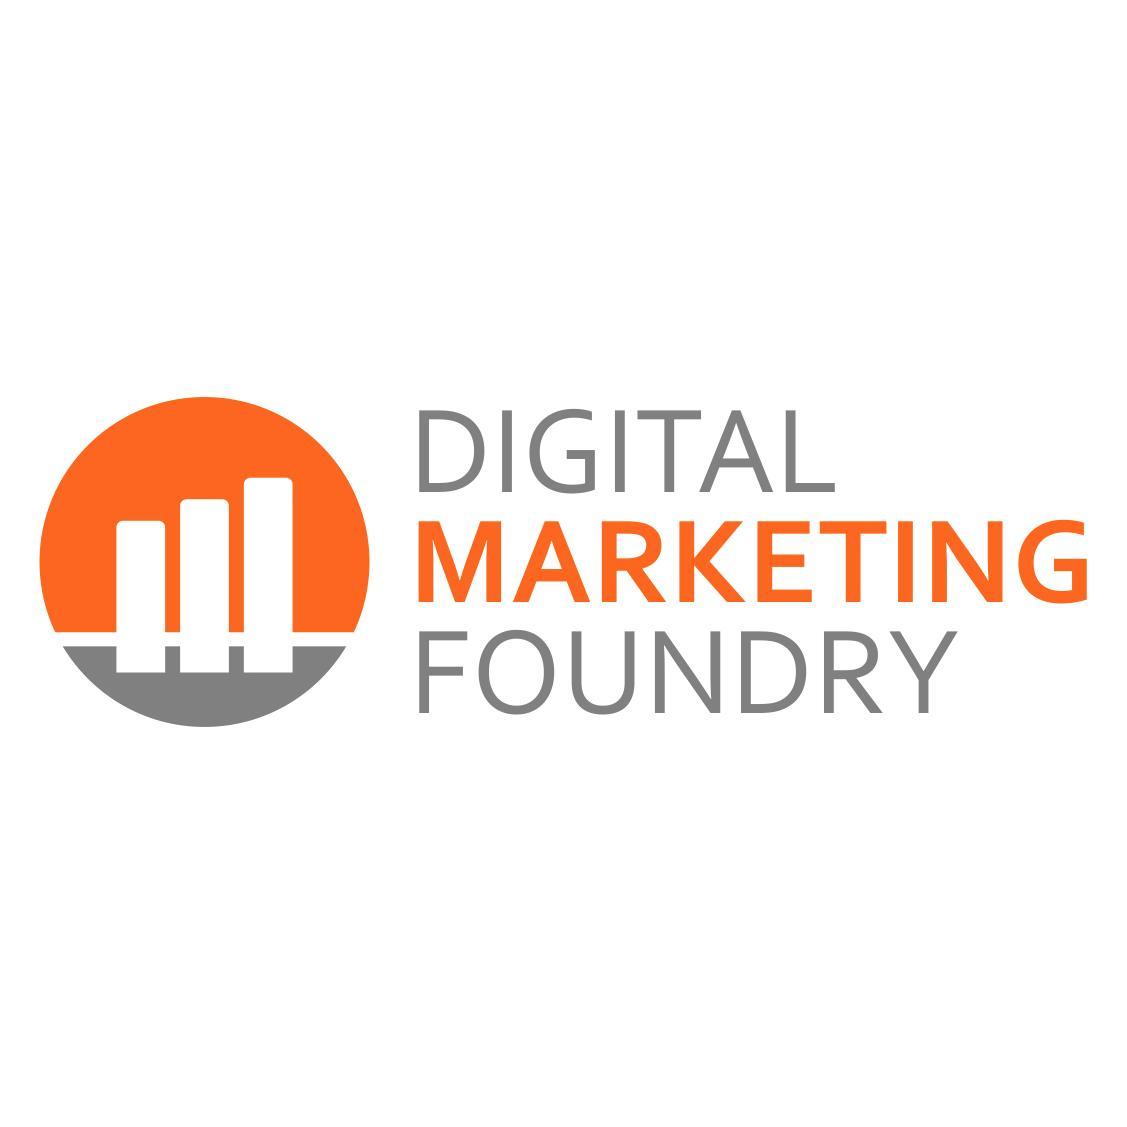 American Underground and The Startup Factory are launching the Digital Marketing Foundry, a new marketing education institute.